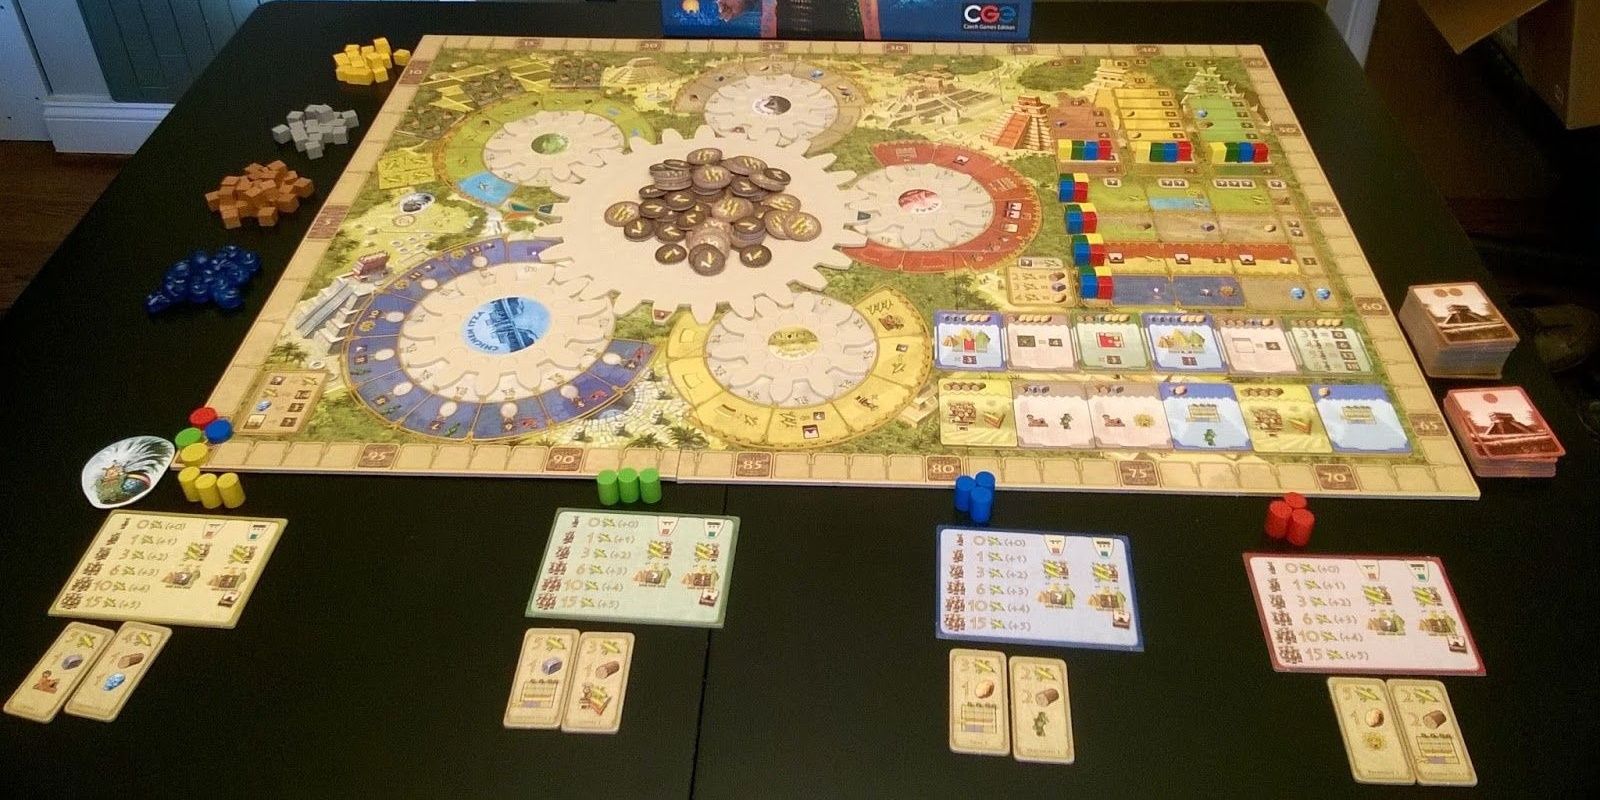 Tzolkin game showing components and gears